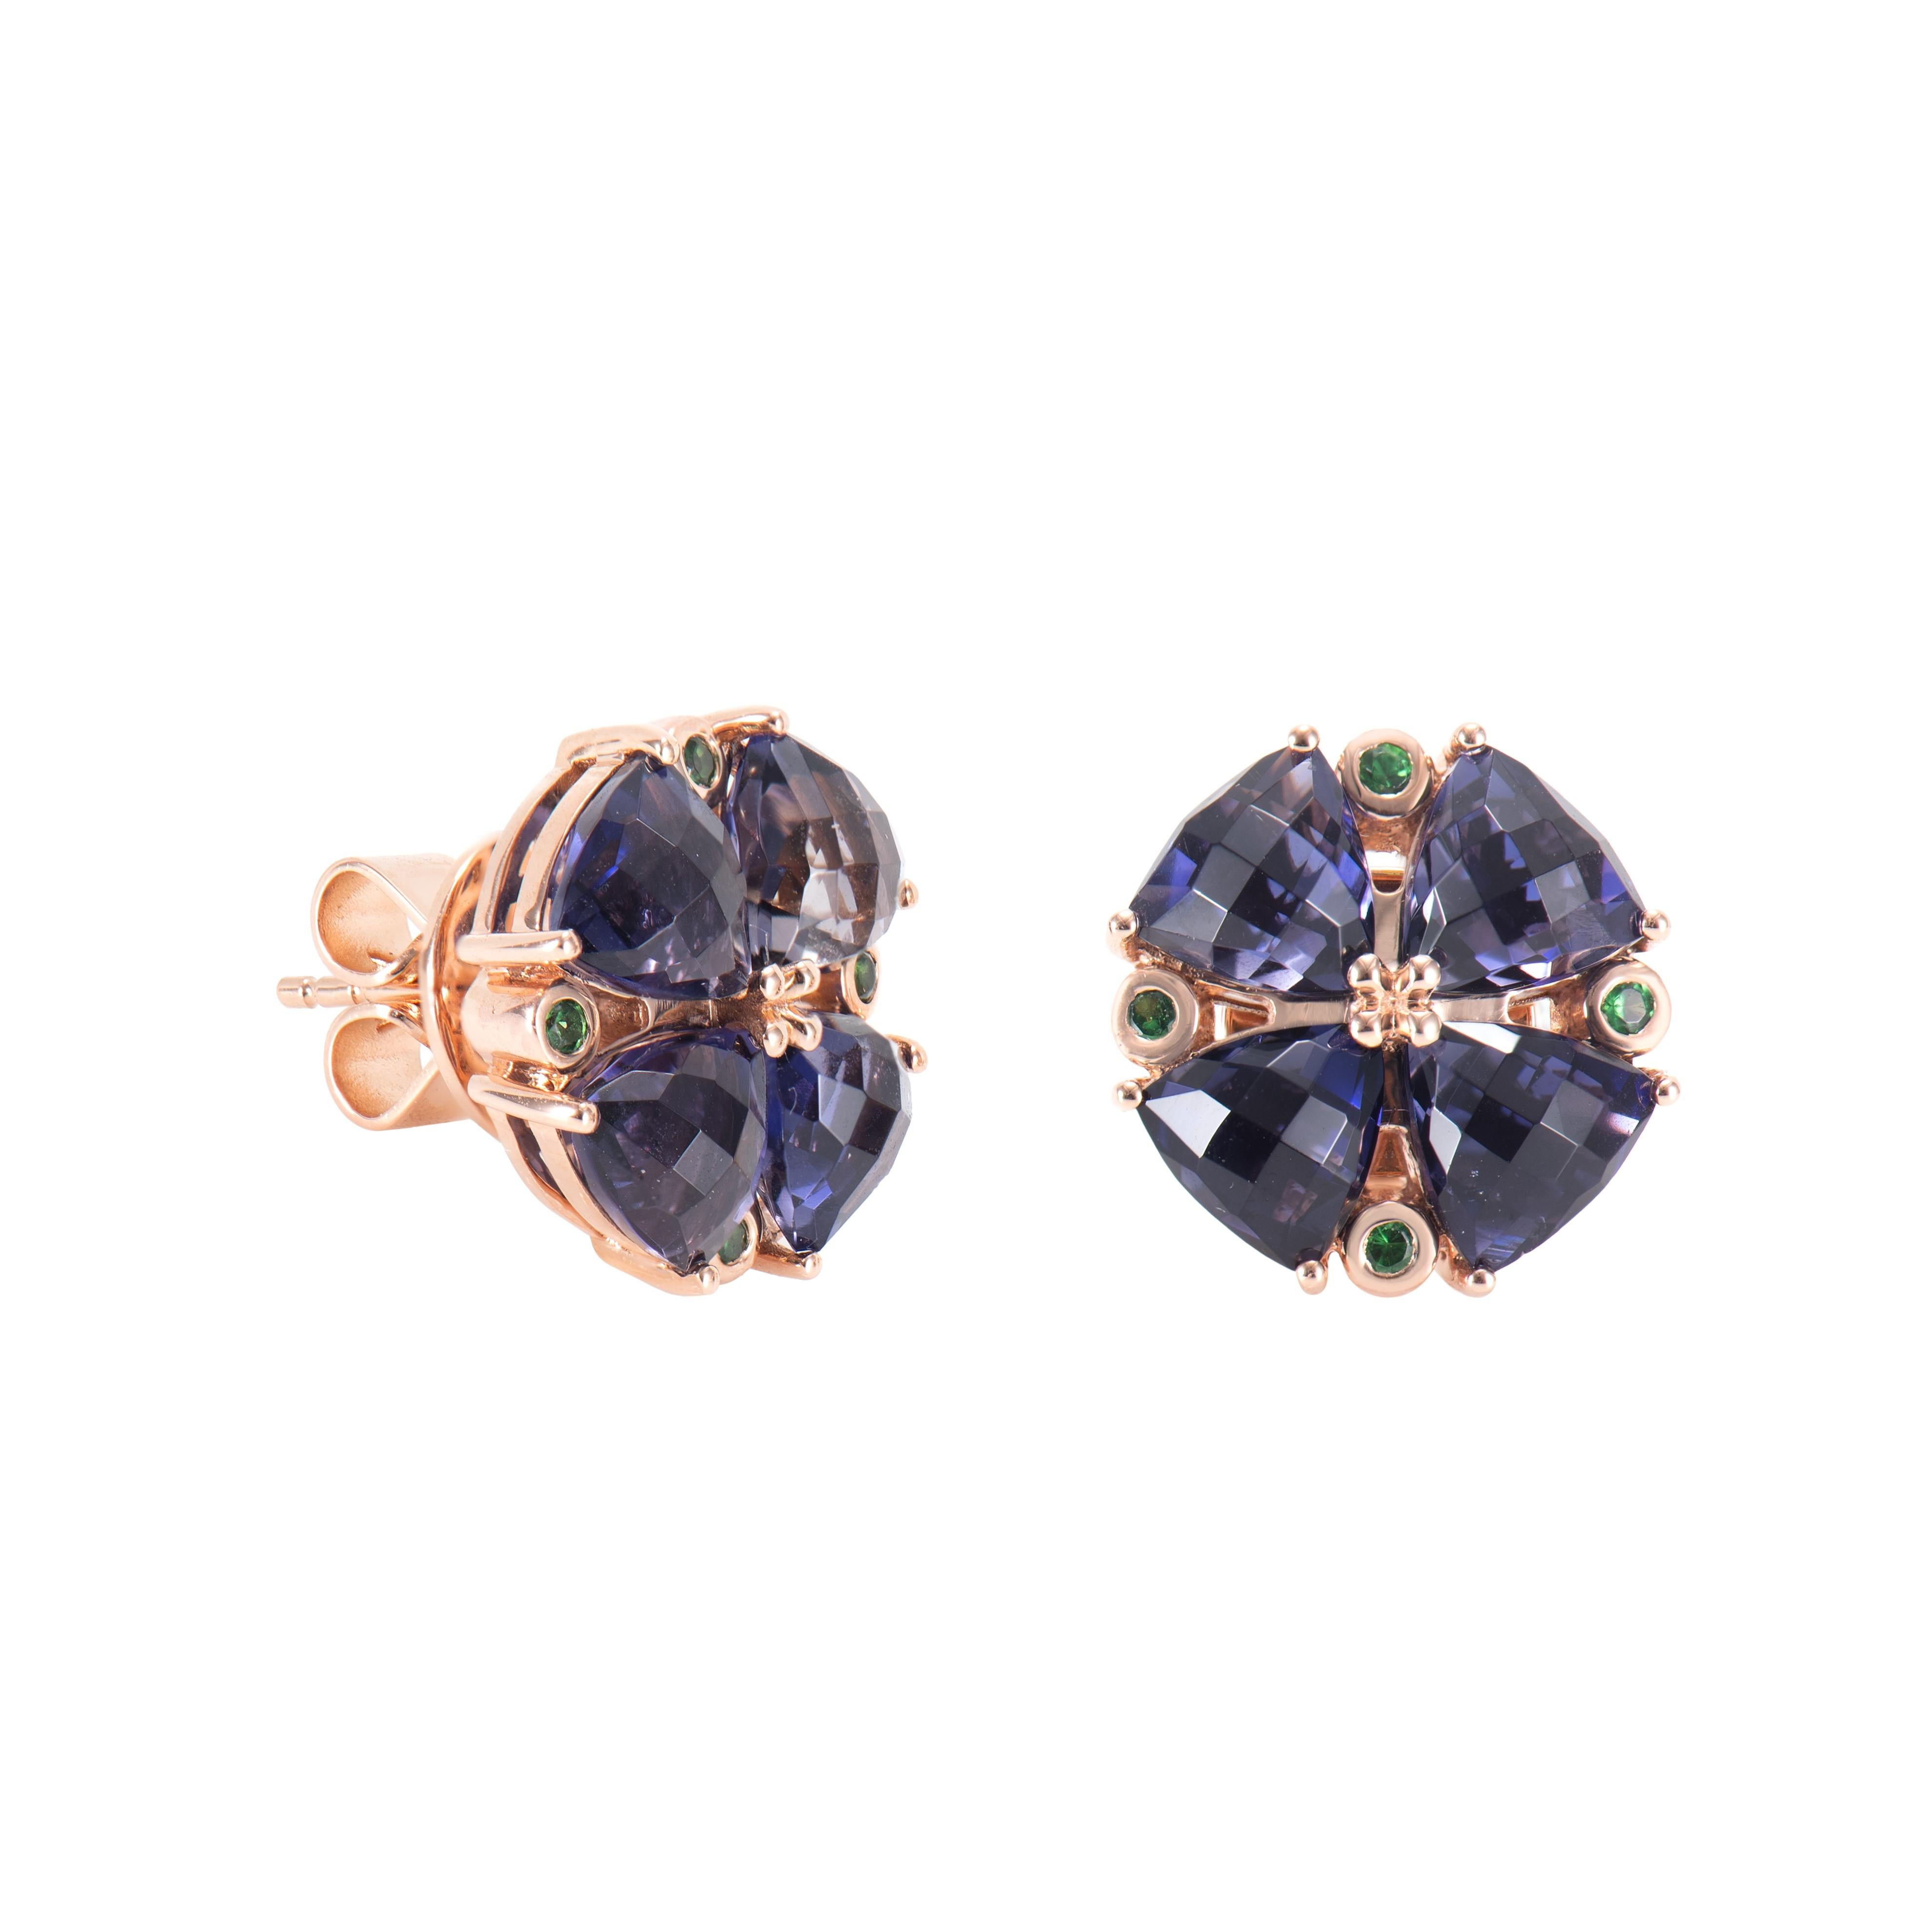 These are fancy iolite earrings in a trillion shape with purple hue. The stud earrings are elegant and can be worn for many occasions.

6.03 Carat Iolite Stud Earring in 18 Karat Rose Gold with Tsavorite.

Iolite: 6.03 carat, 5.50mm size, Trillion